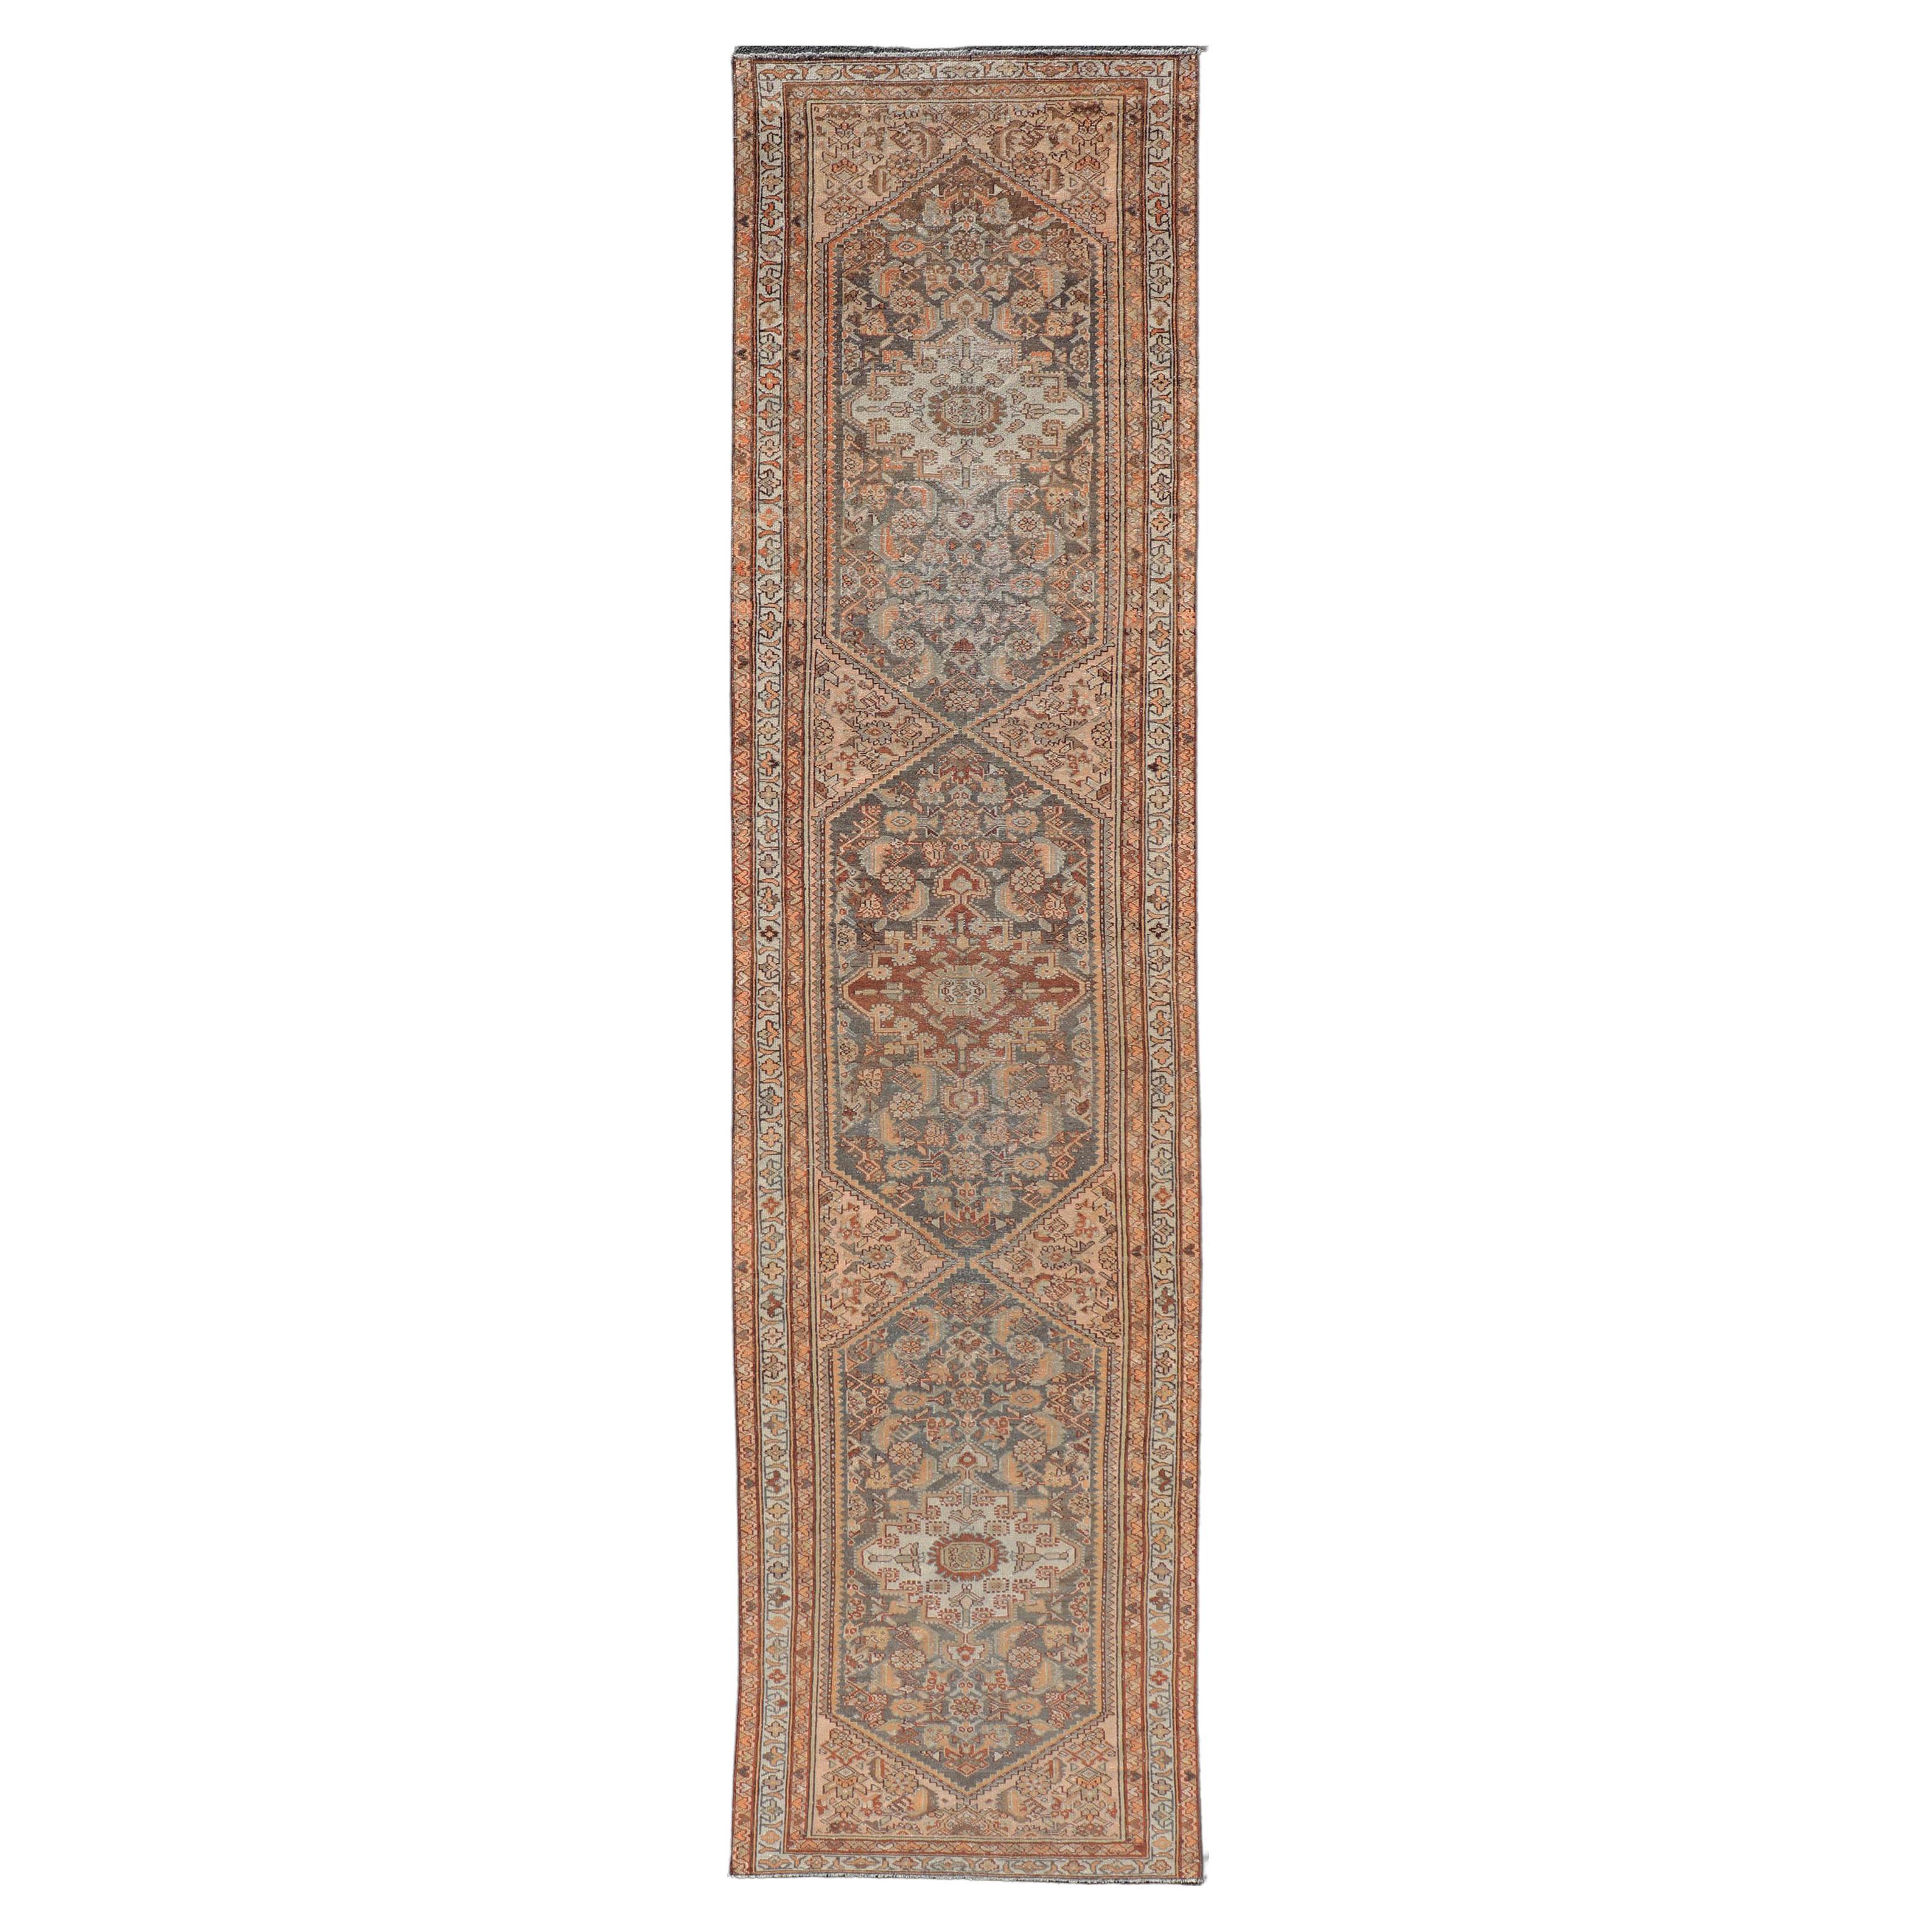 Antique Persian Malayer Runner with All-Over Sub-Geometric Medallion Design